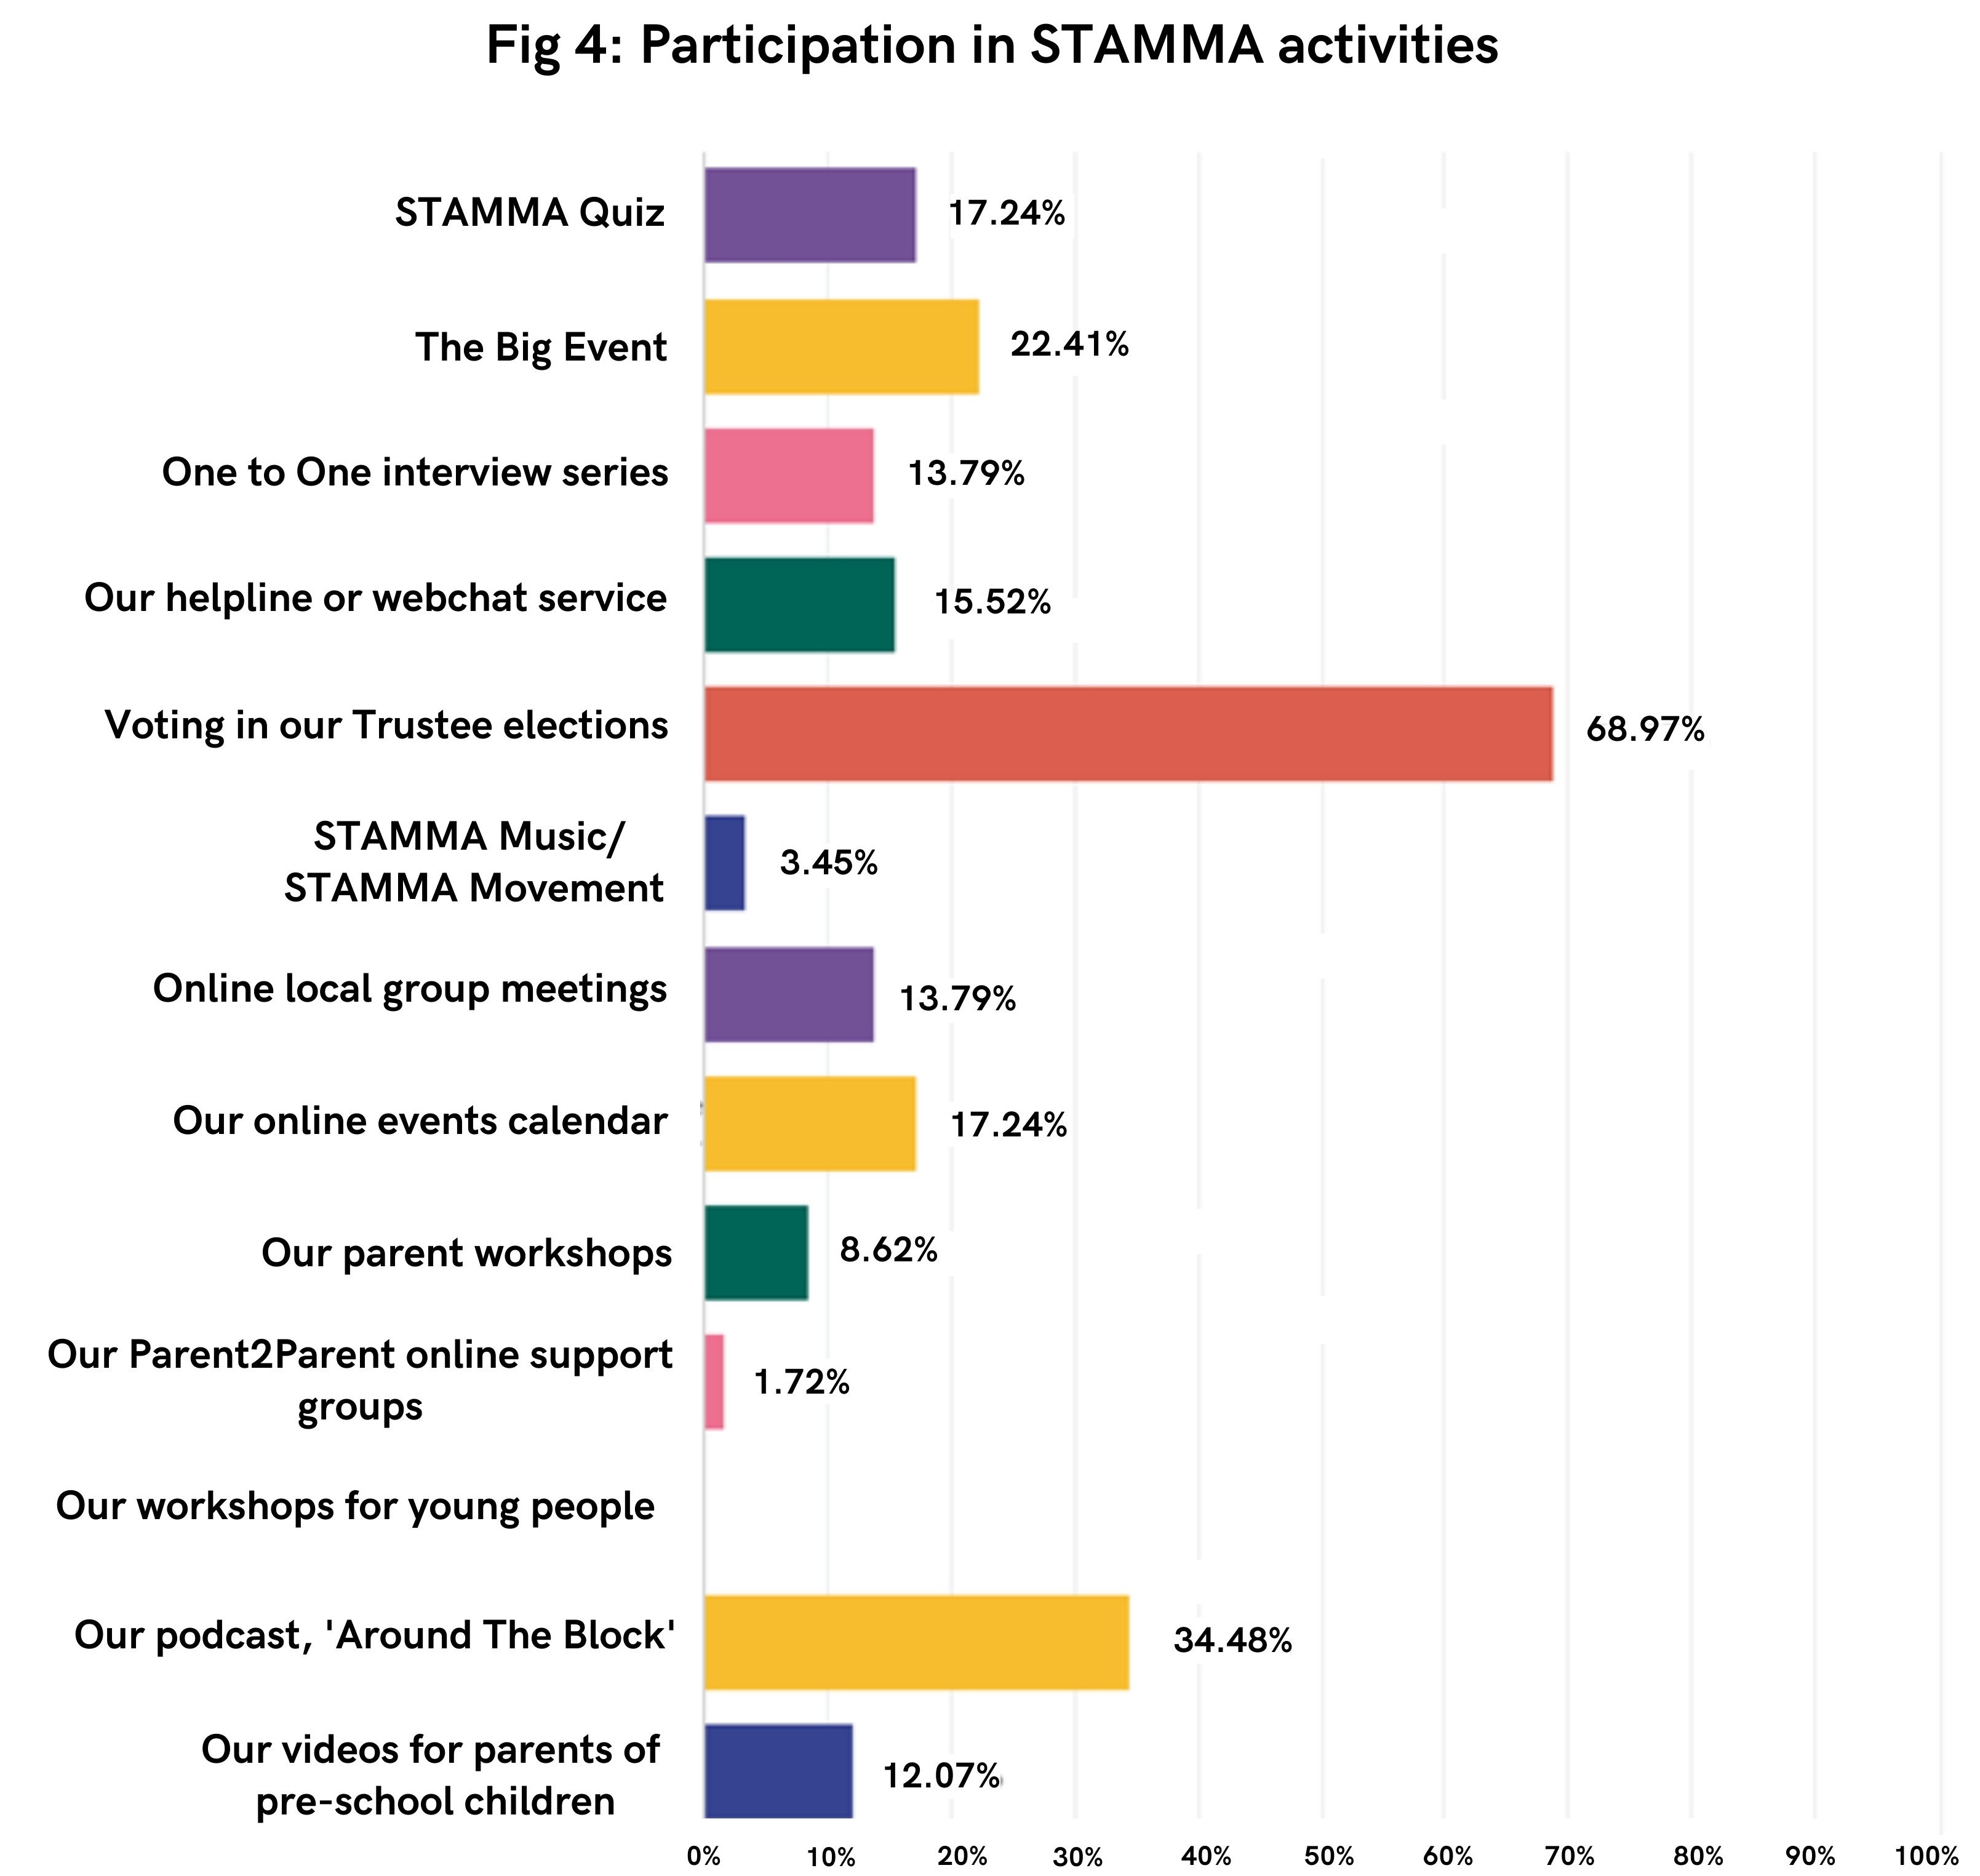 A bar graph showing what STAMMA activities respondents took part in